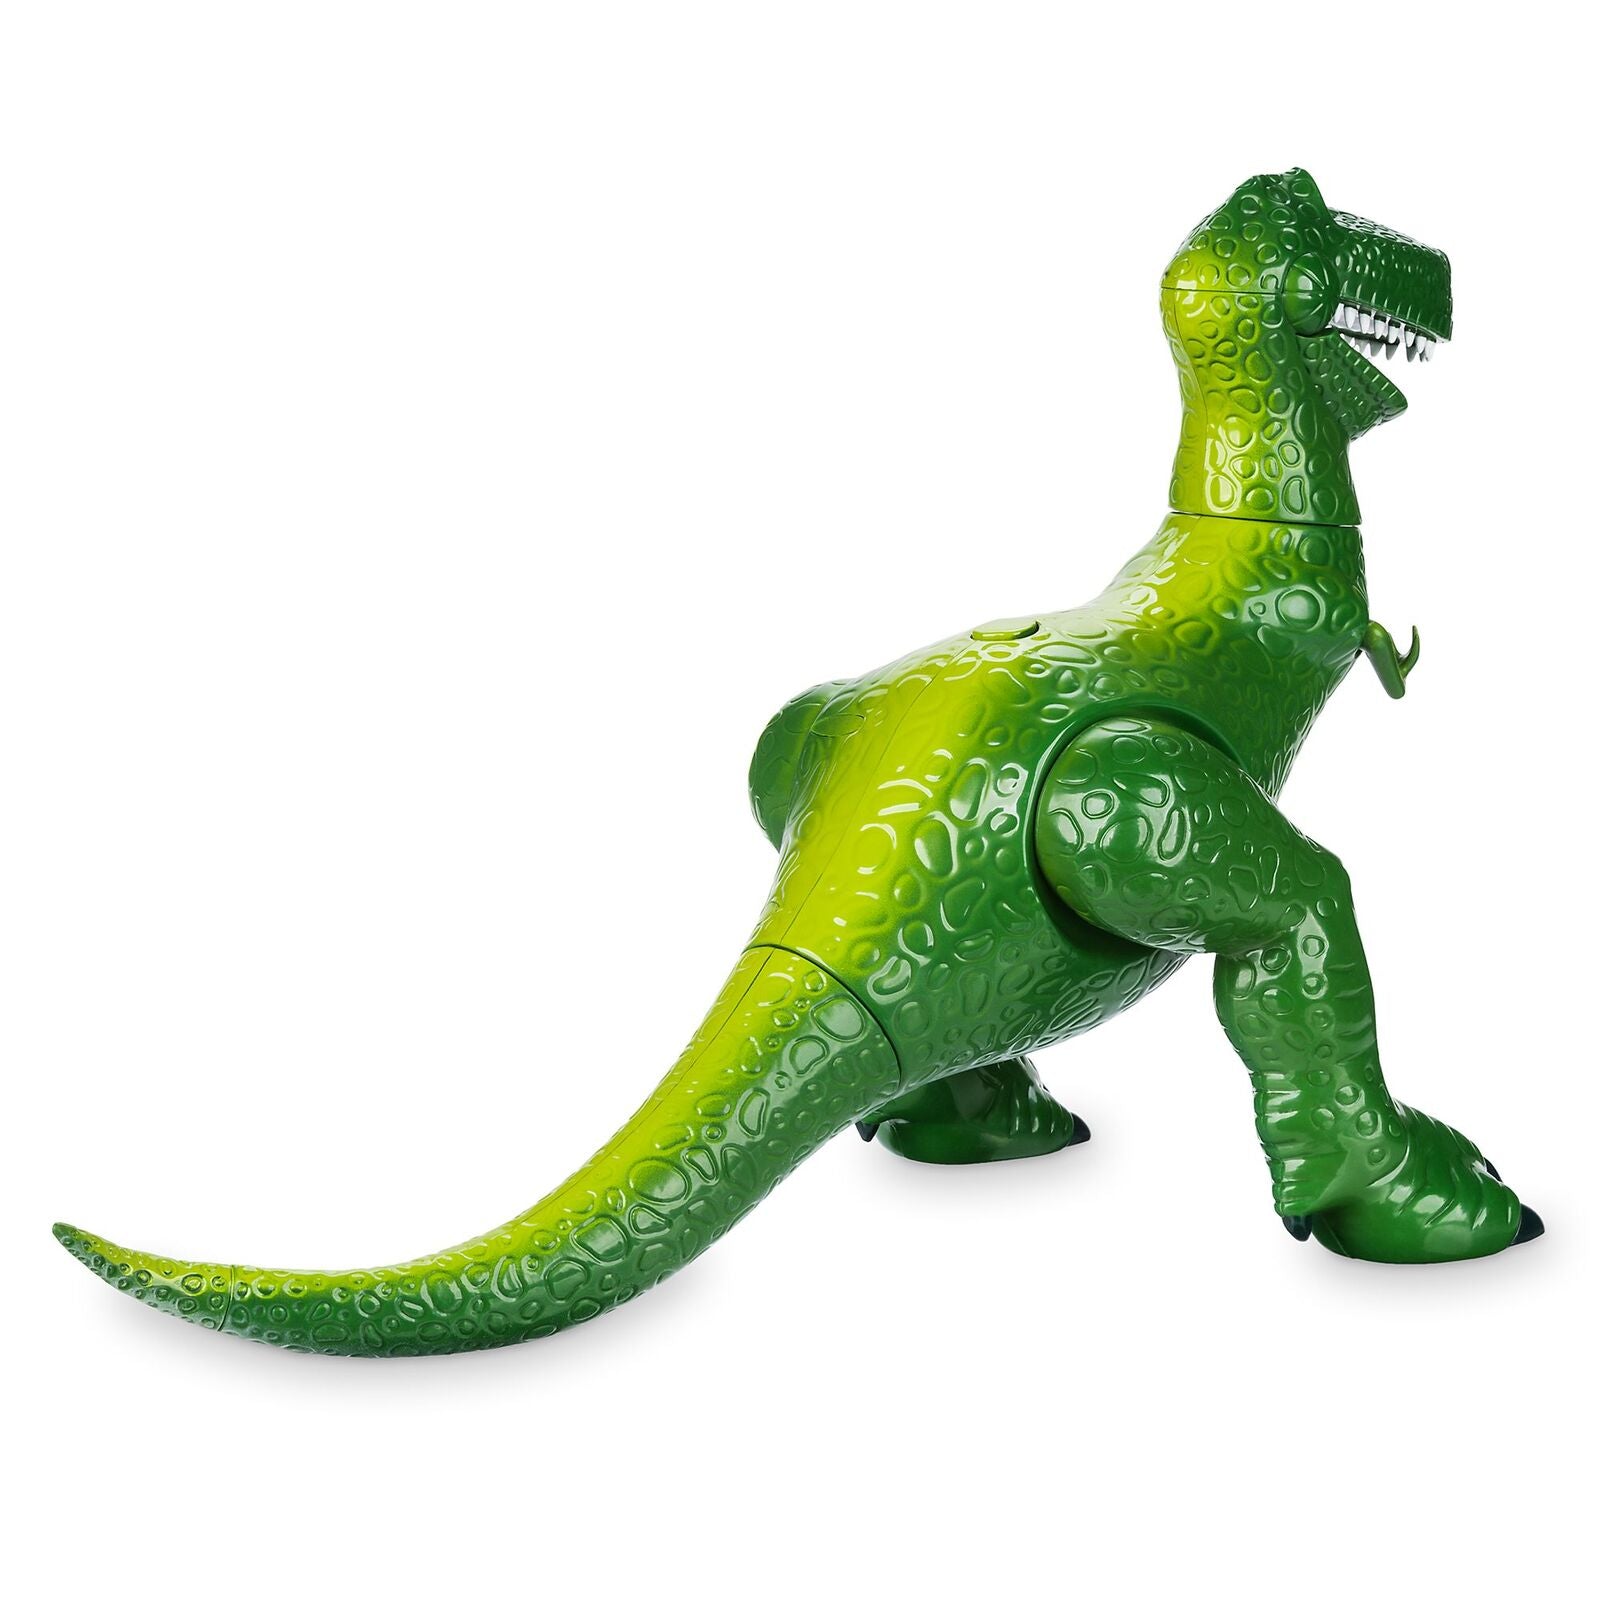 Toy Story Interactive Talking Action Figure - Rex